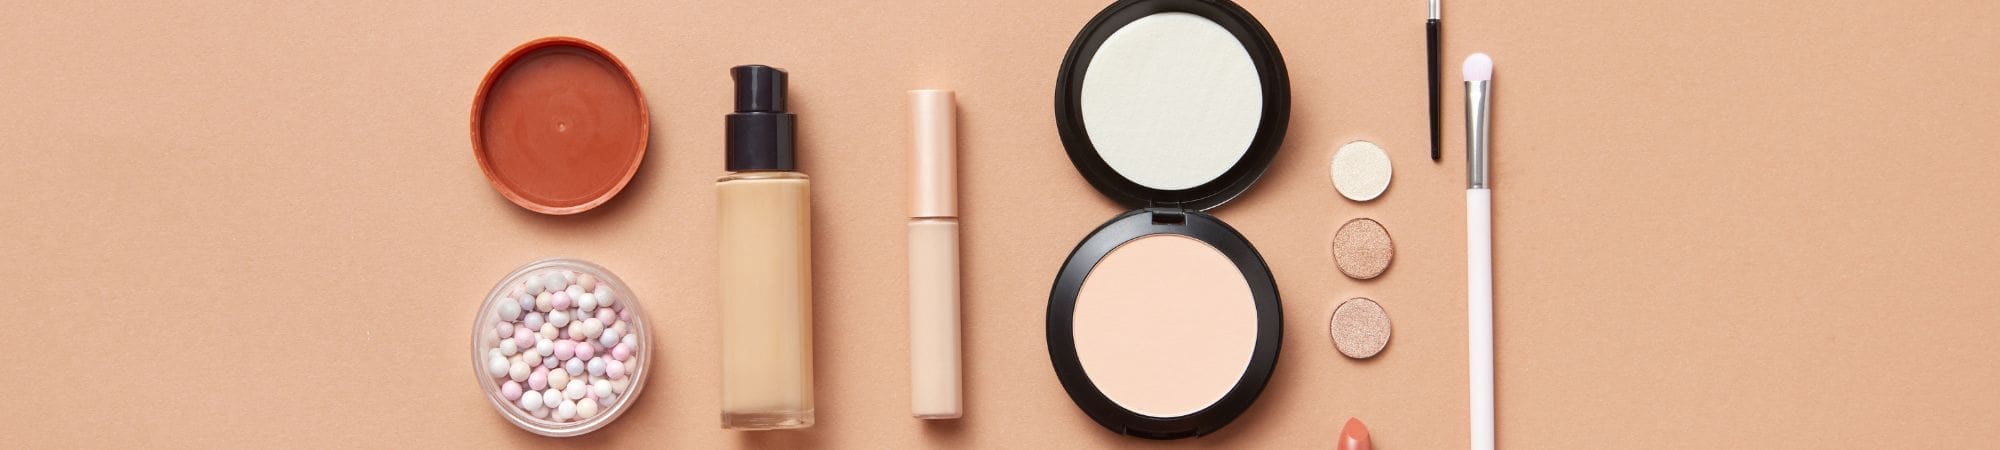 74% of beauty consumers agree that makeup products from affordable brands work just as well as products from premium brands